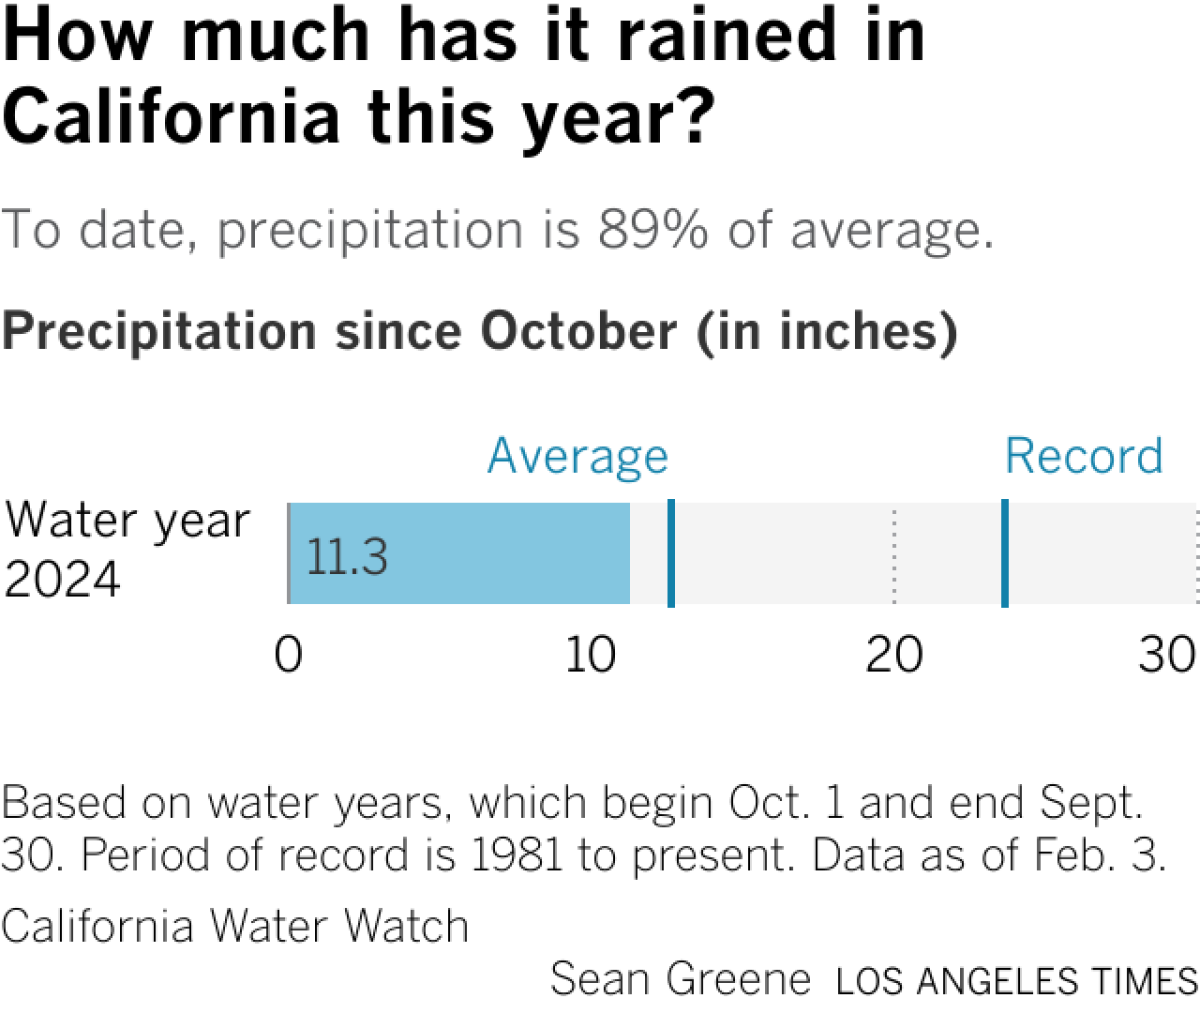 California has received 11.3 inches of rain so far this year, compared with an historical average of 12.6.